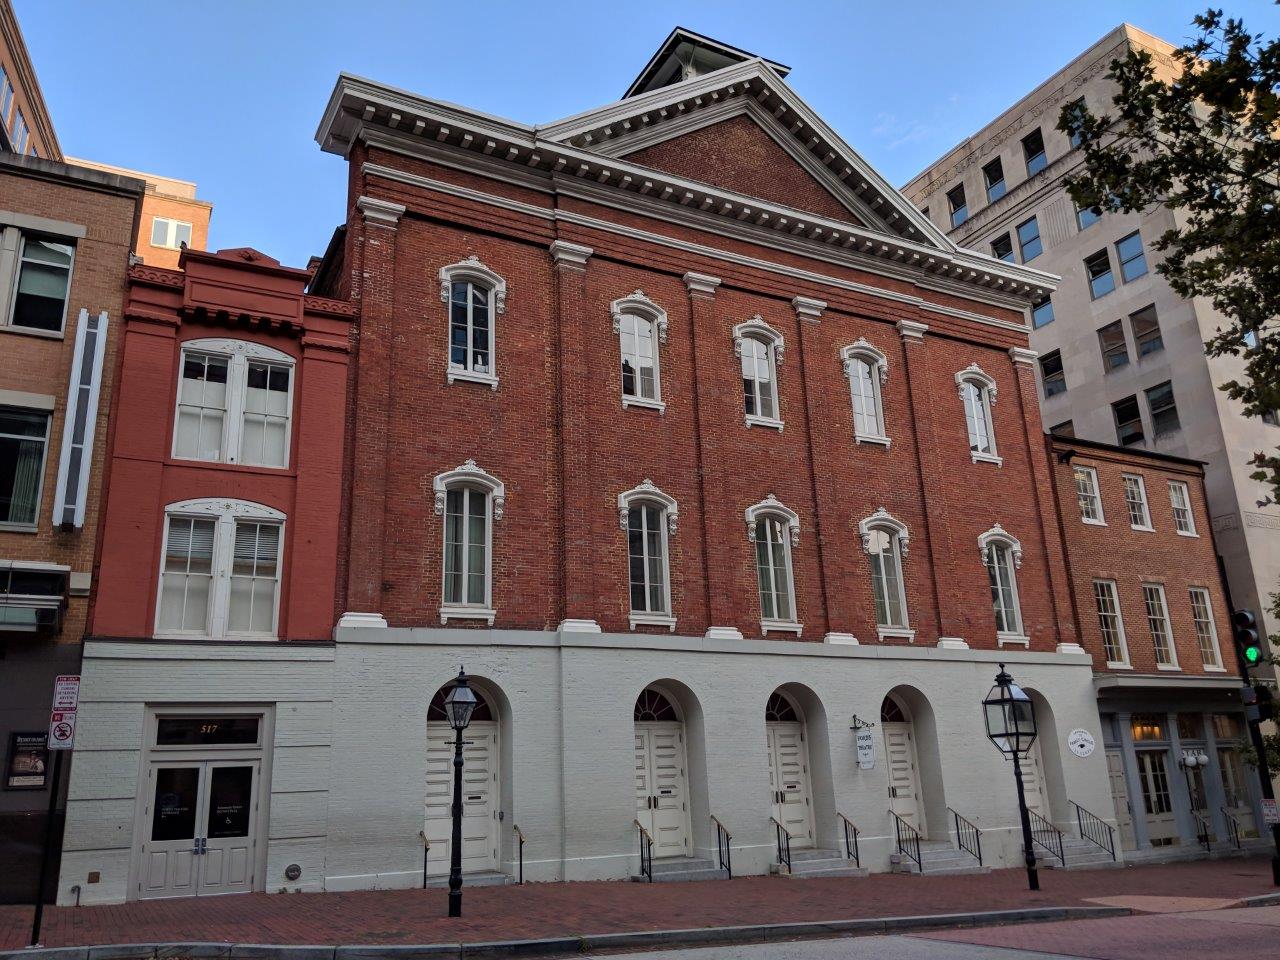 Abraham Lincoln assassination site at Ford's Theater in Washington